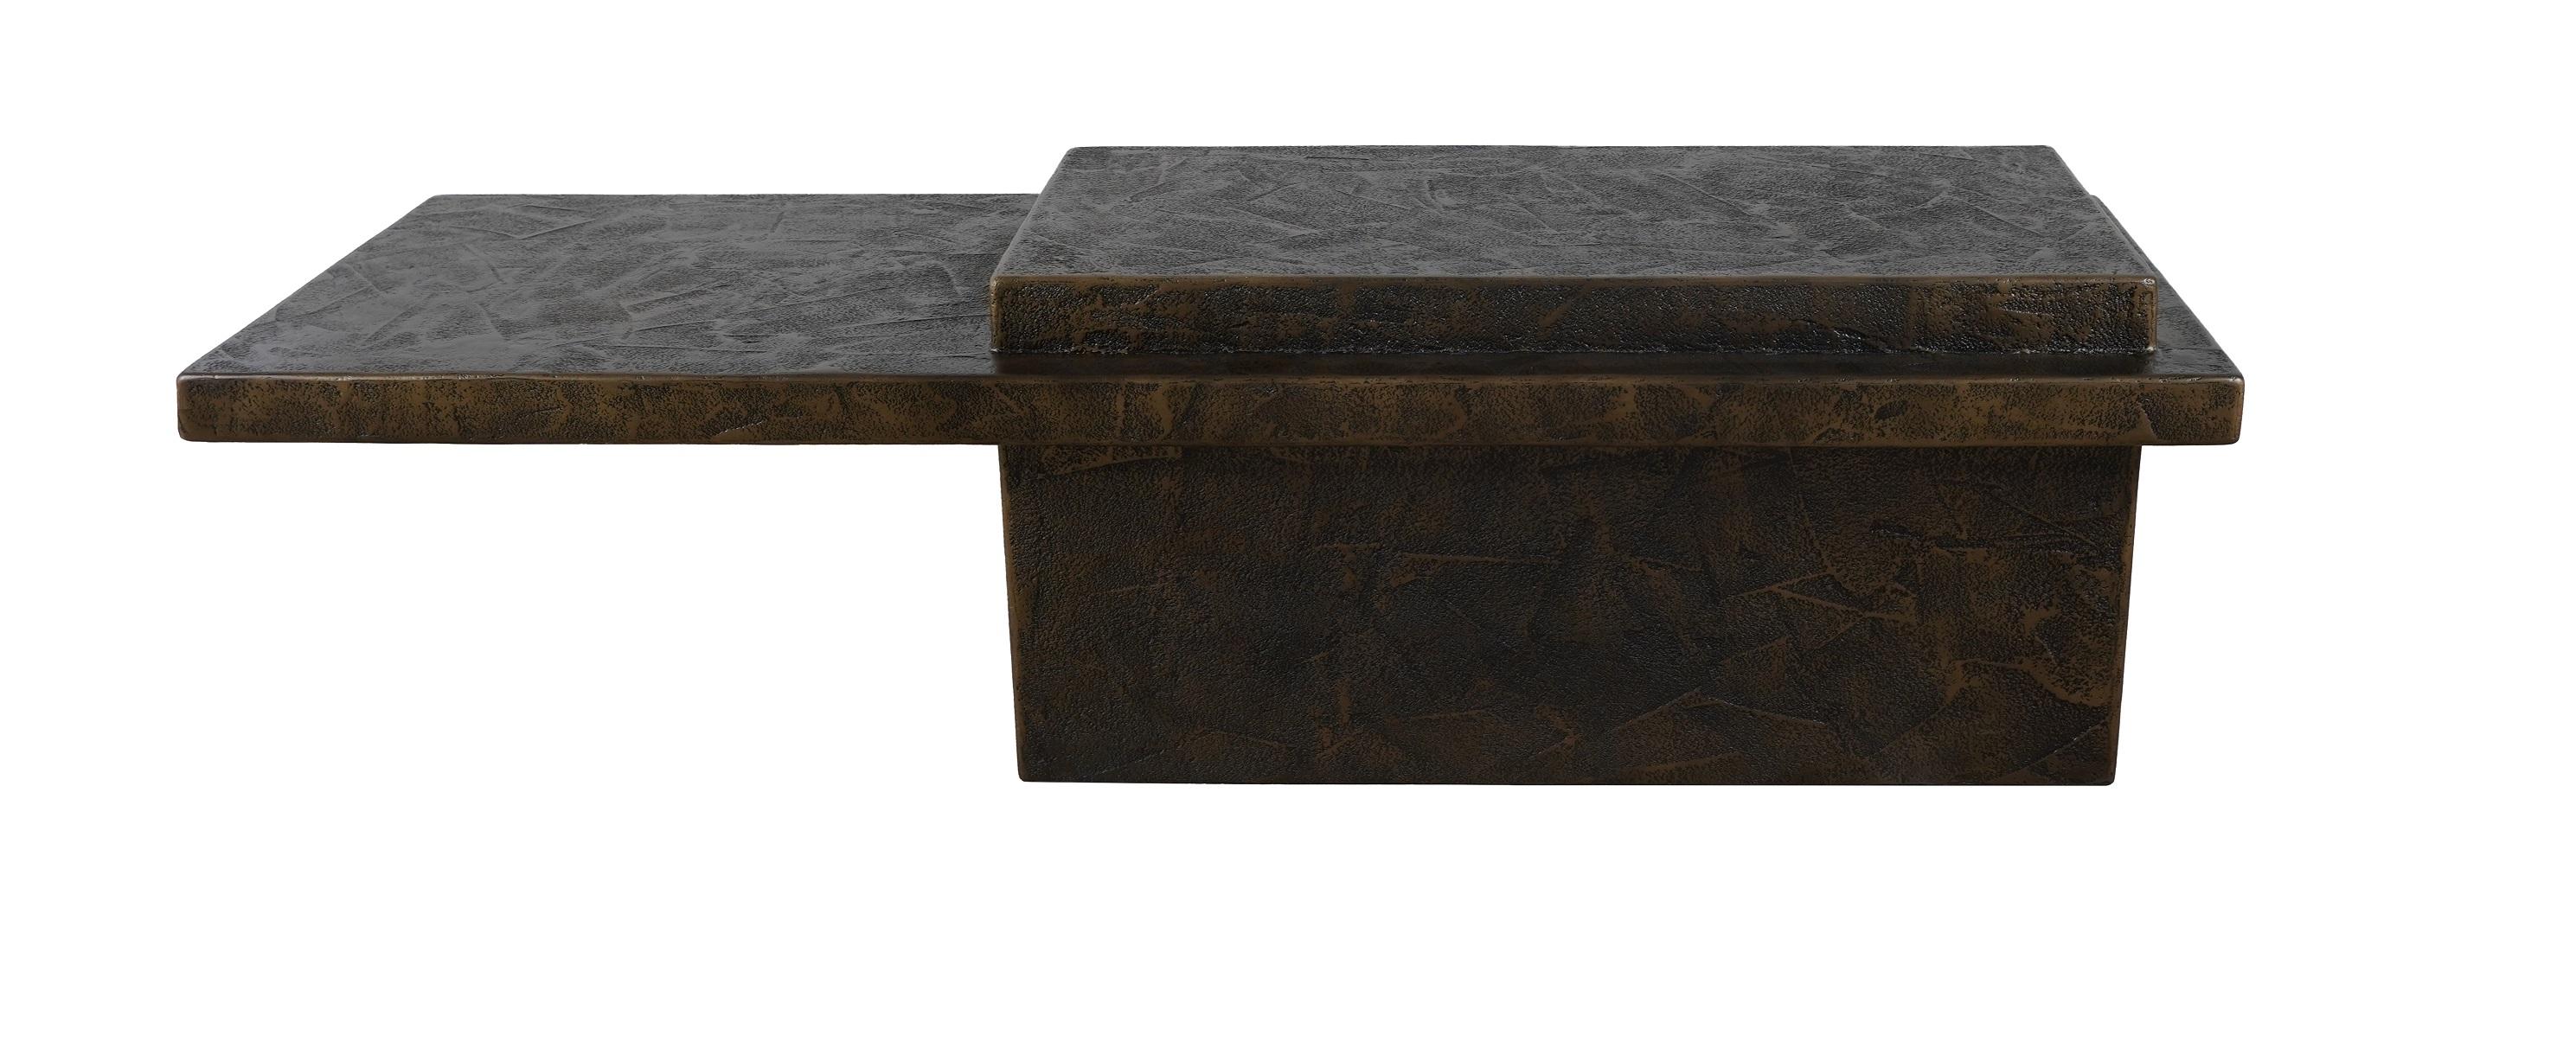 This handcrafted coffee table is crafted from a composite blend of wood, resin, and fiberglass, it features a distinctive design inspired by the raw and unadorned aesthetics of the brutalist school of design. Drawing inspiration from the robust